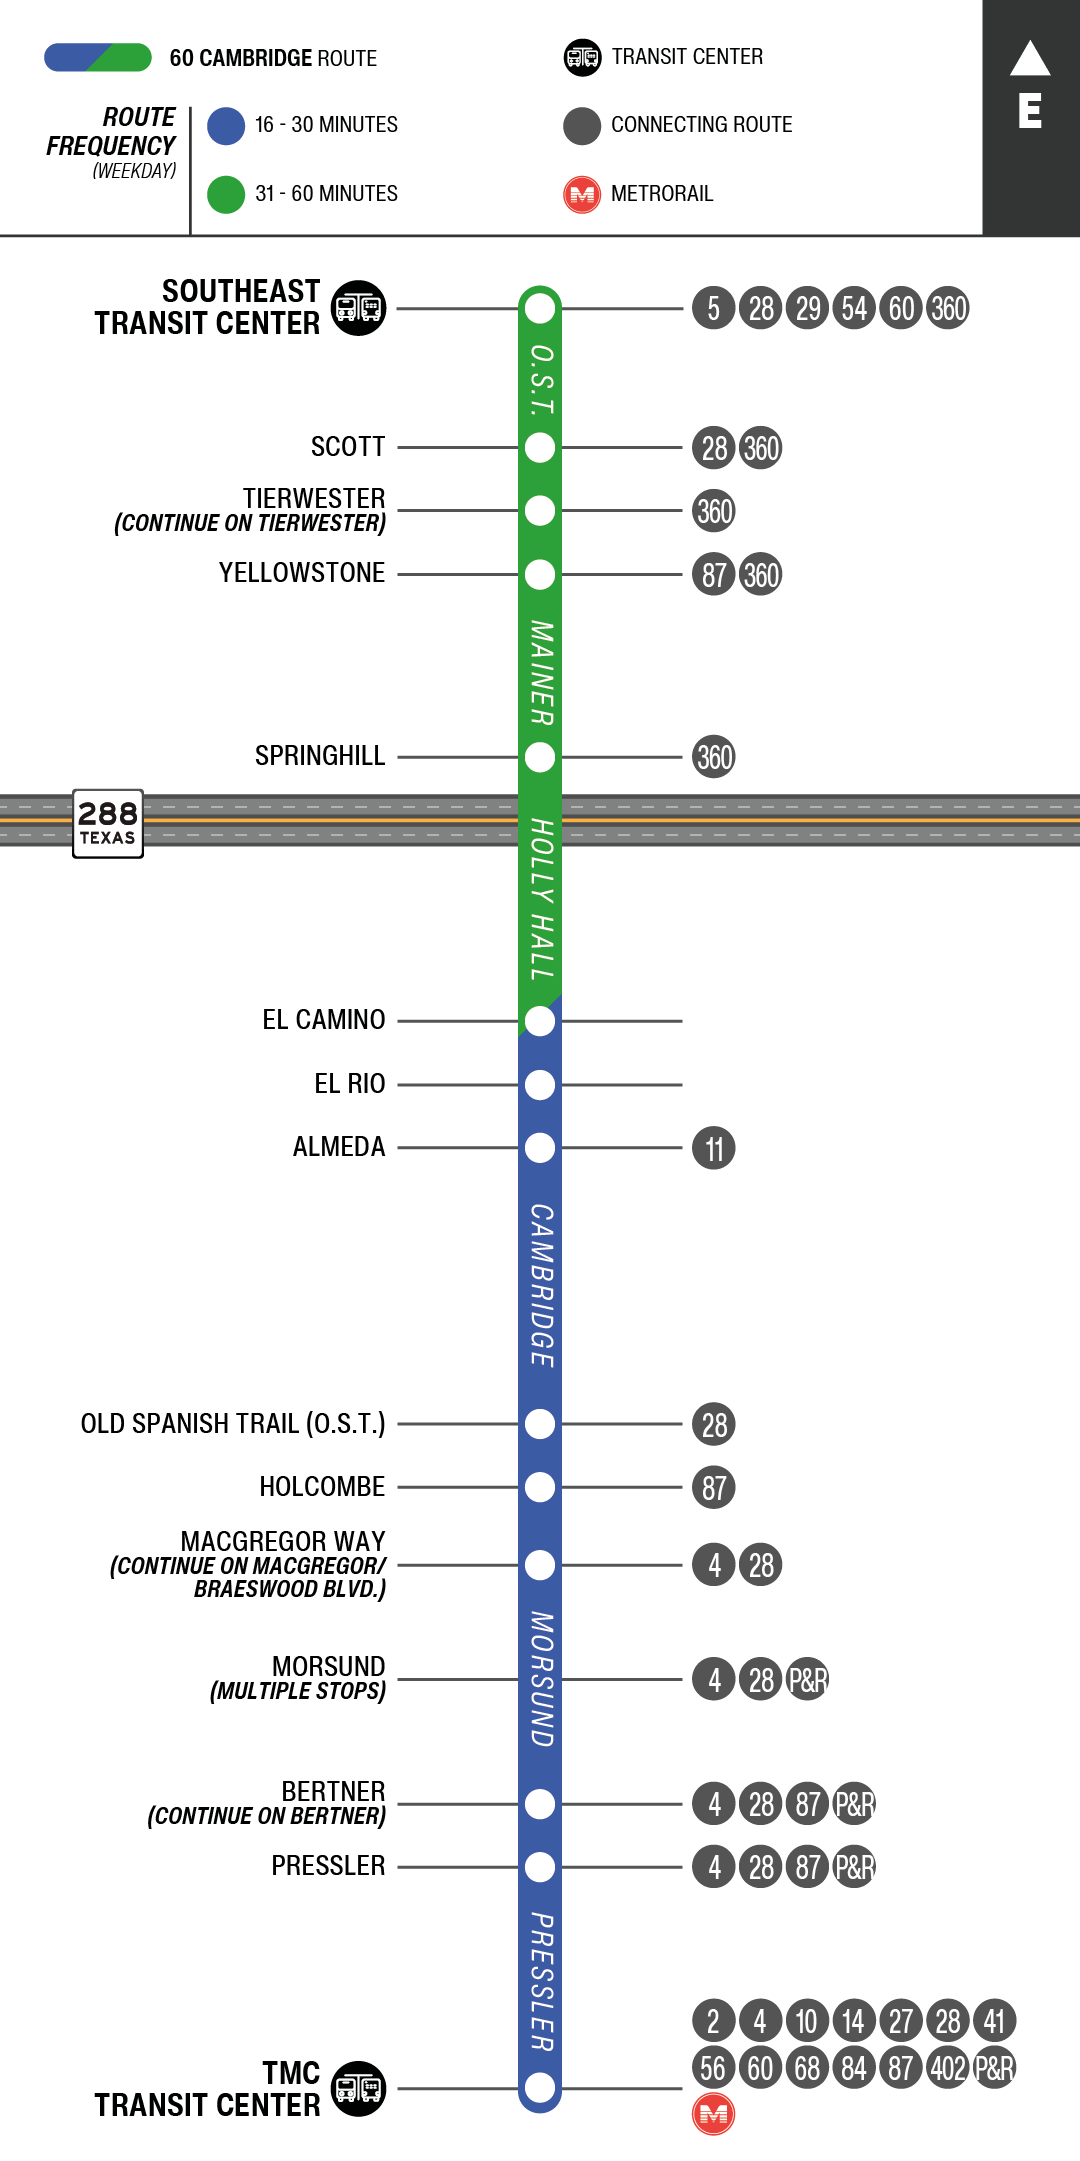 Route map for 60 Cambridge bus